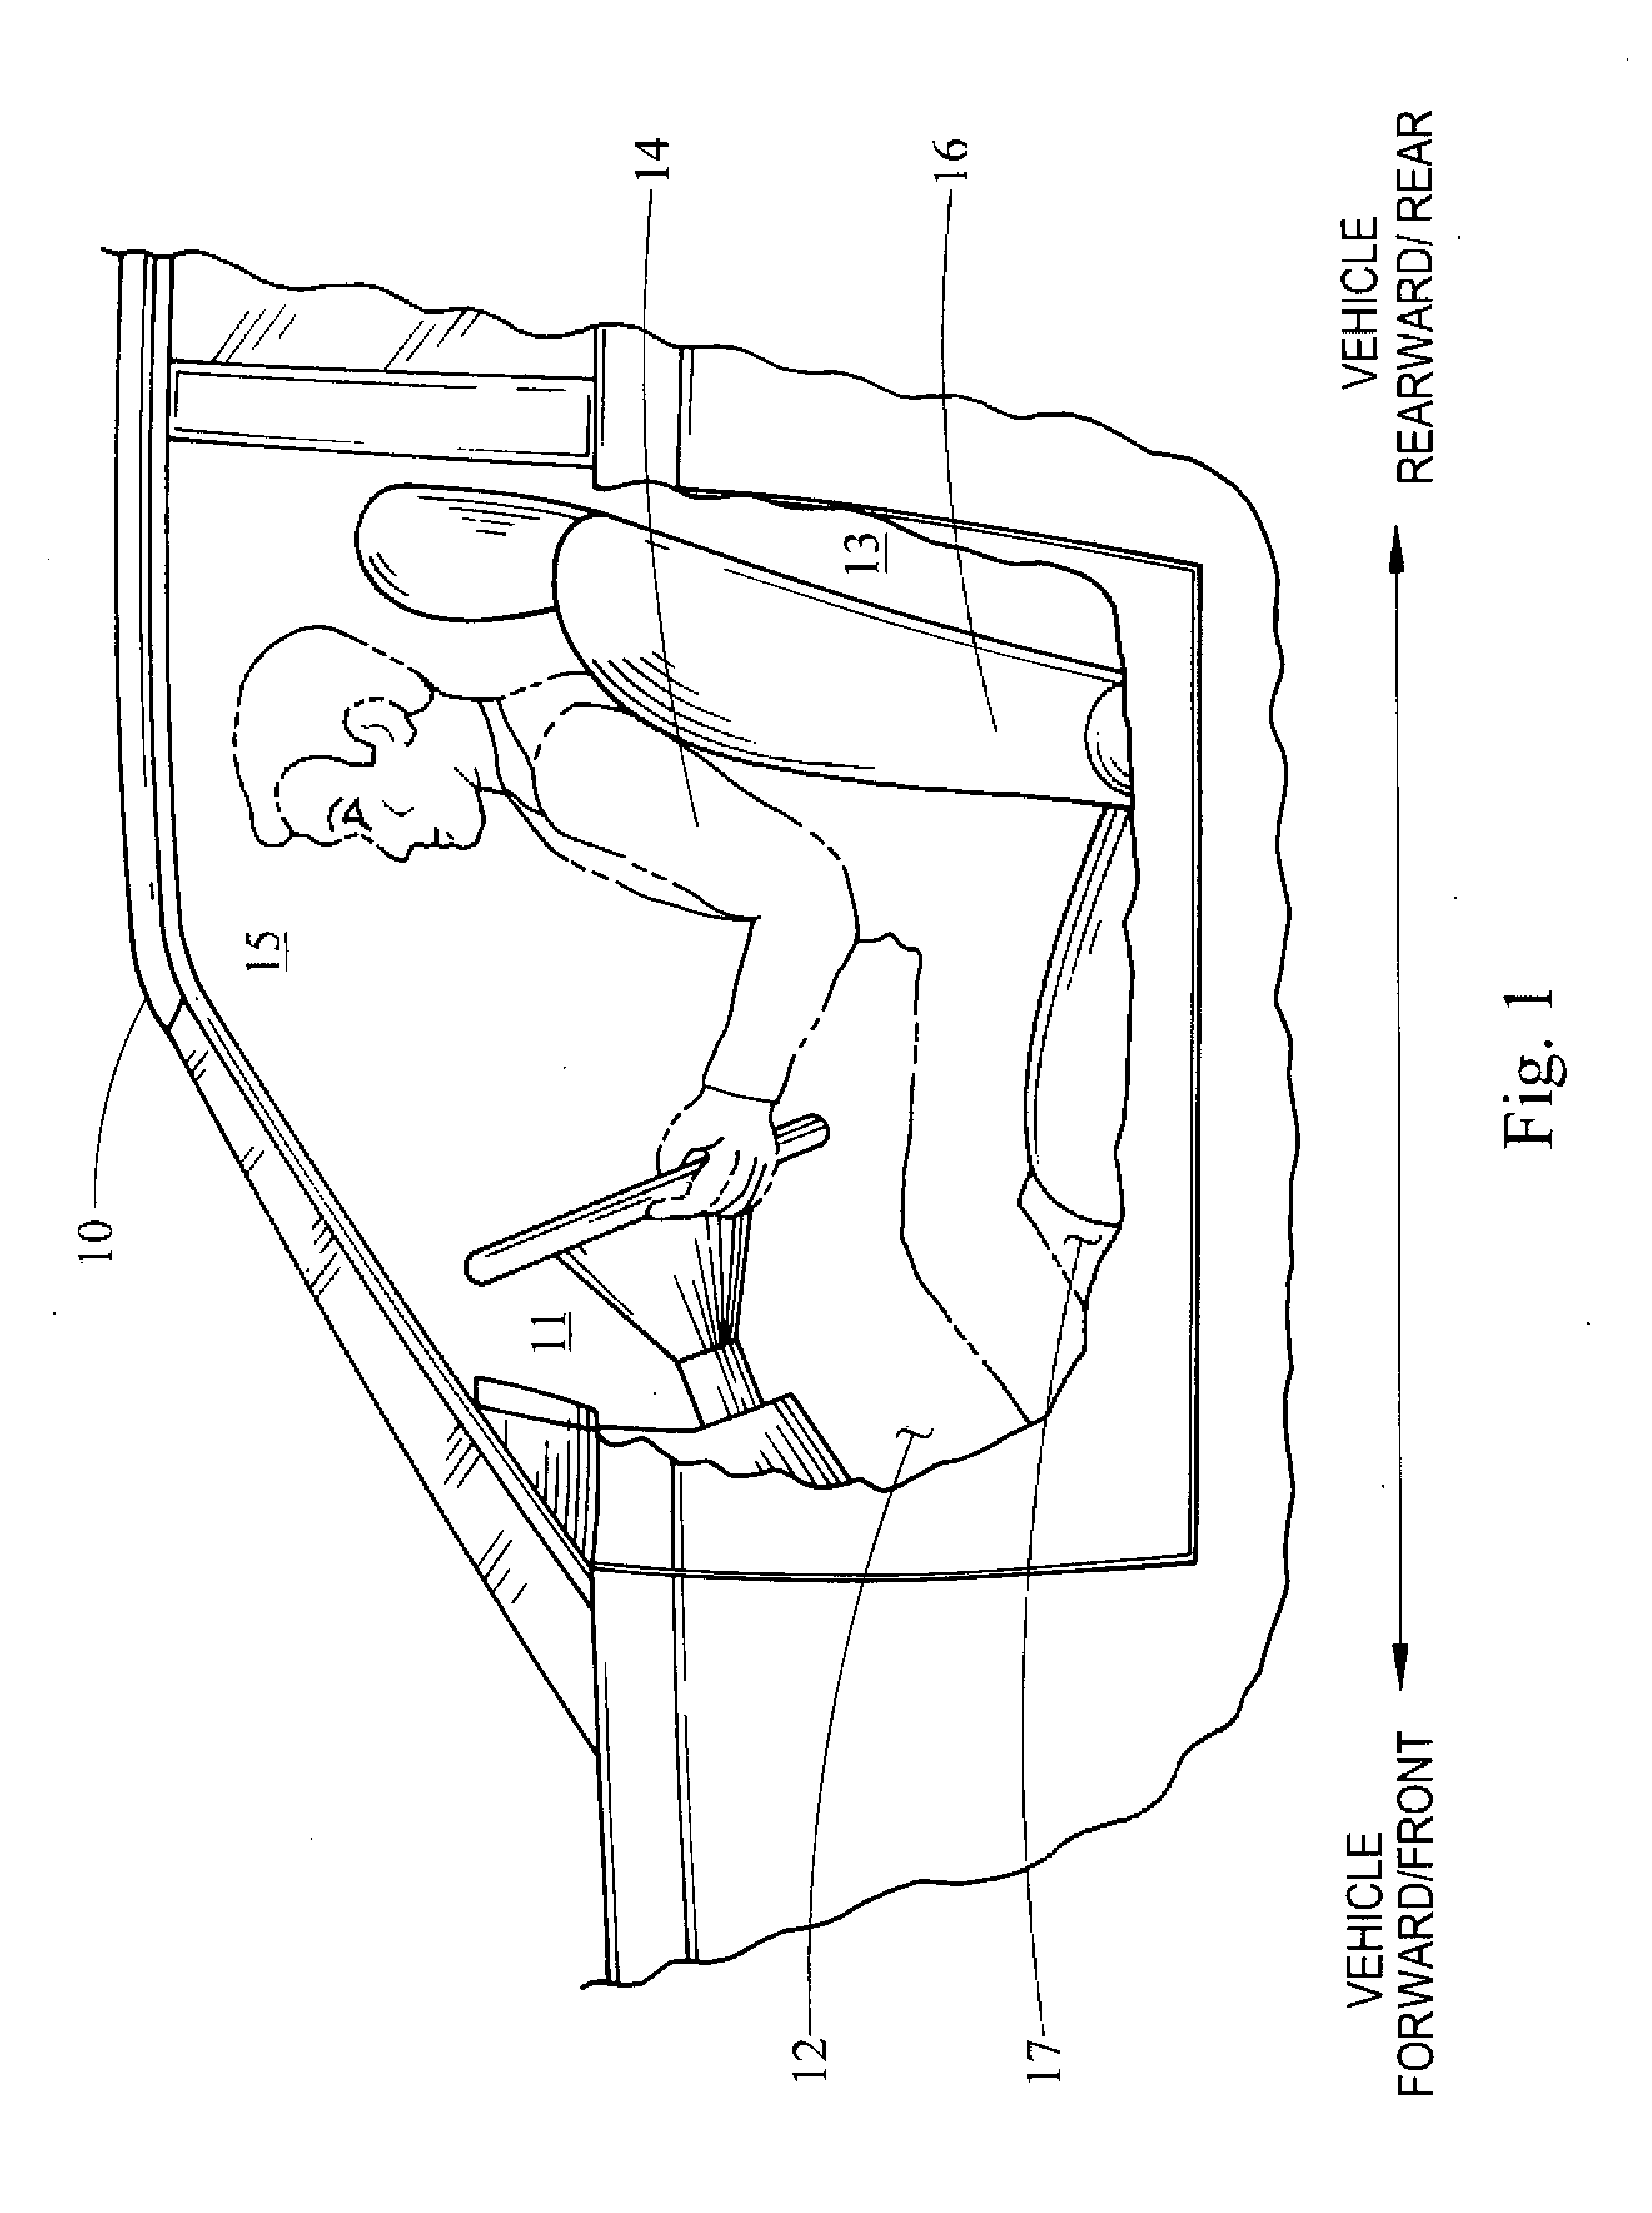 Airbag for protection of a vehicle occupant